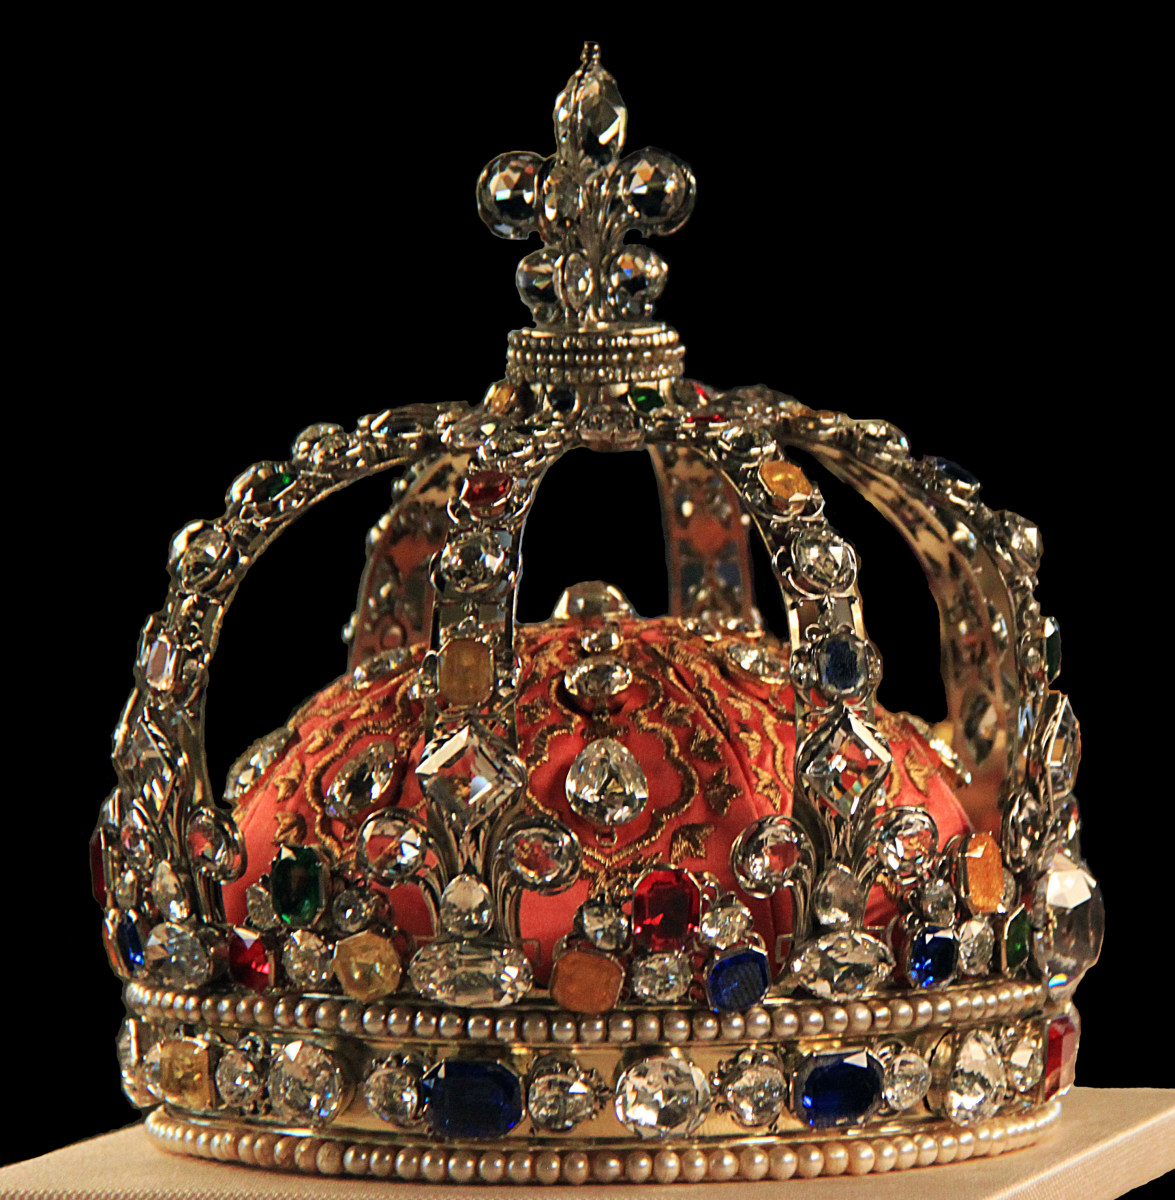 Relinquishing the Heavy Crown of Glory